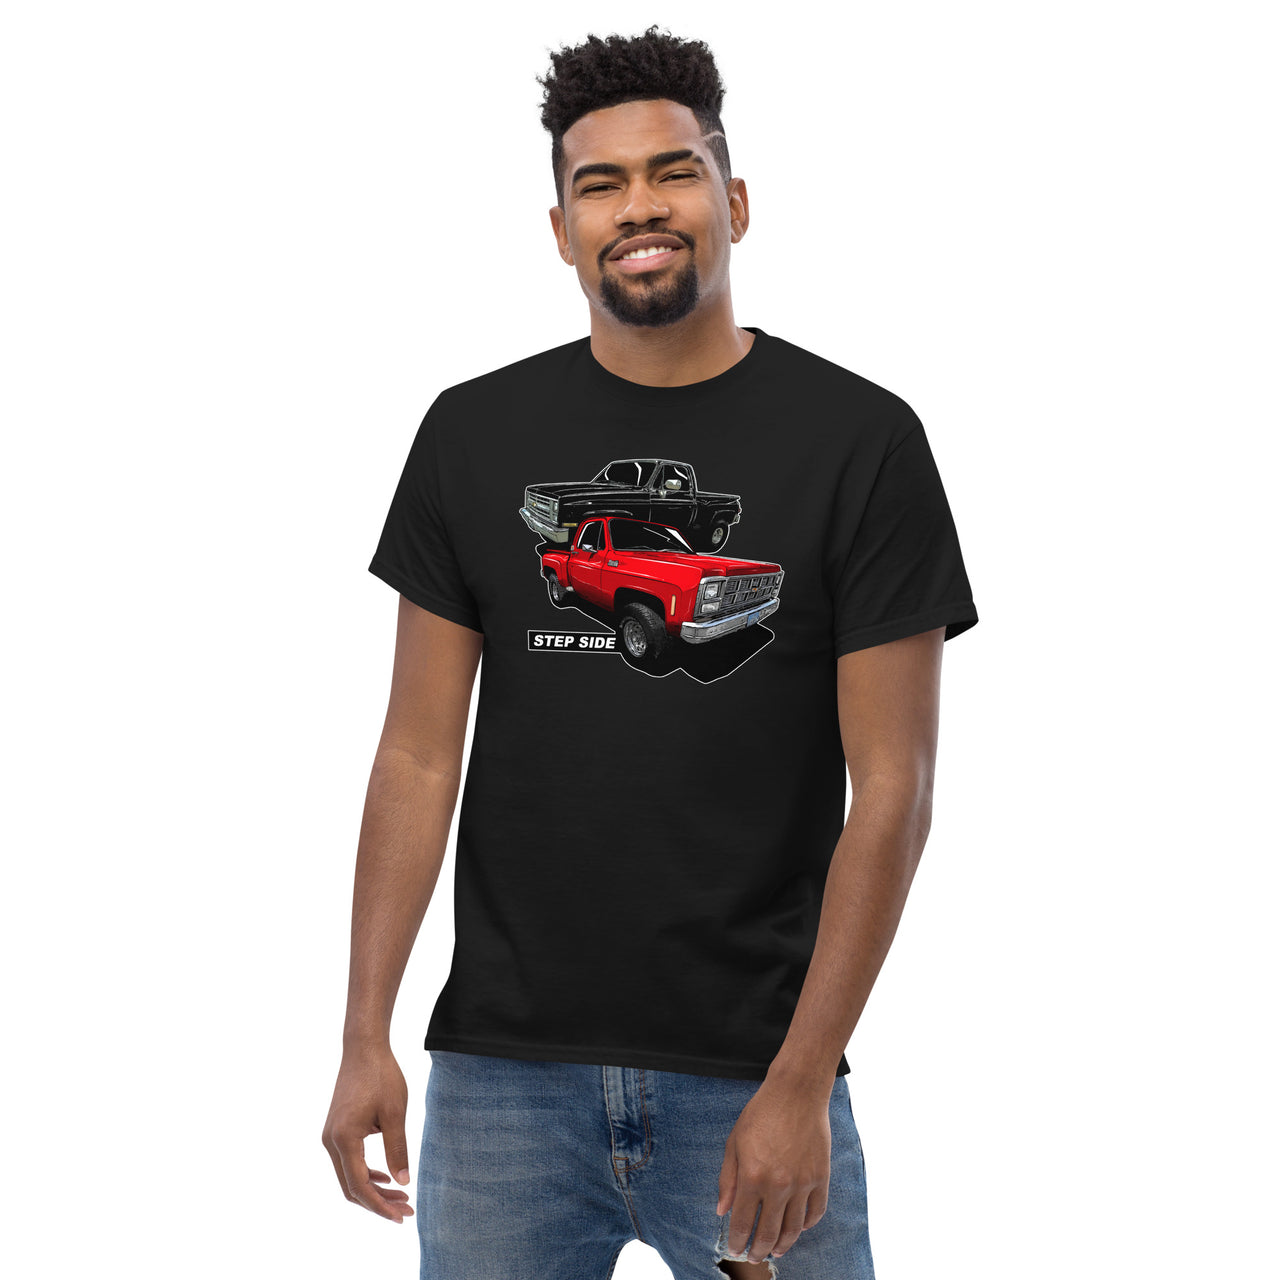 Square Body Step-Side T-Shirt modeled in black